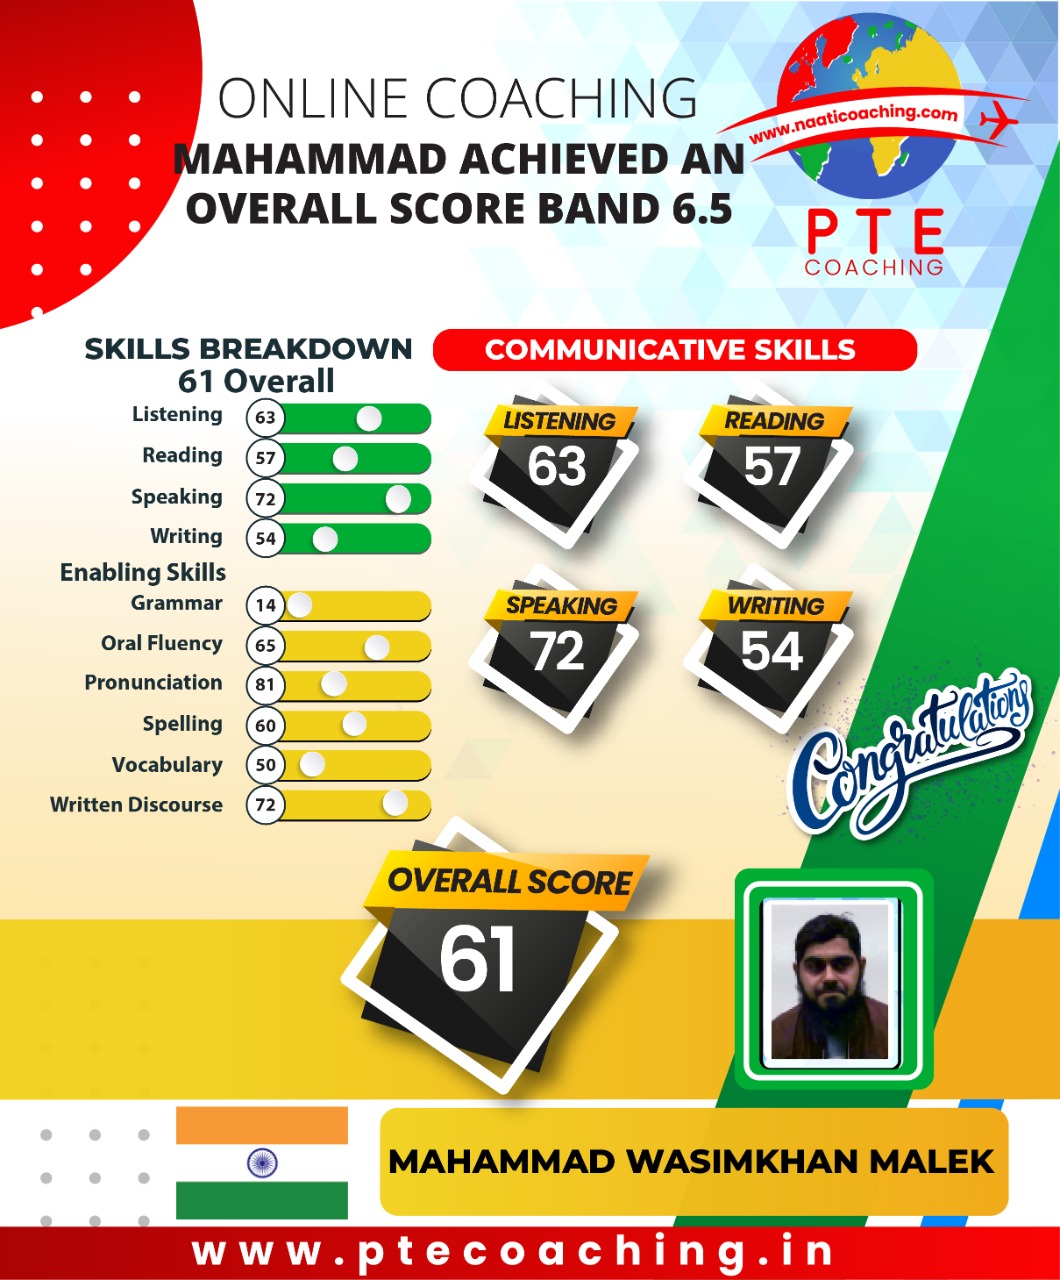 PTE Coaching Scorecard - Mahammad achieved an overall score band 6.5